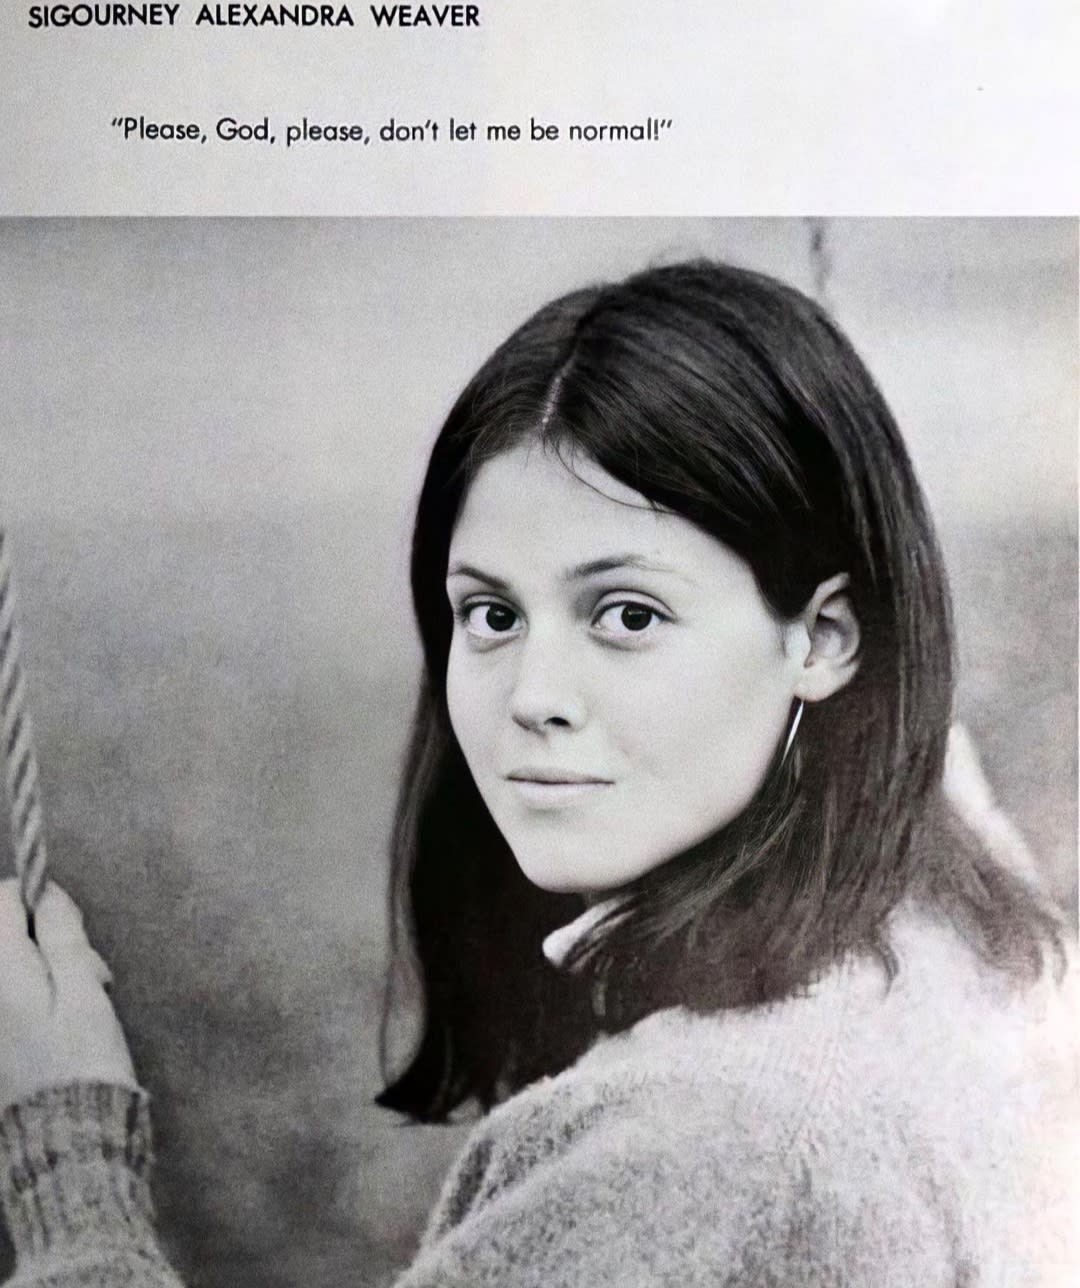 " Please, God, please, don't let me be normal". Sigourney Weaver's High School yearbook picture.1967.